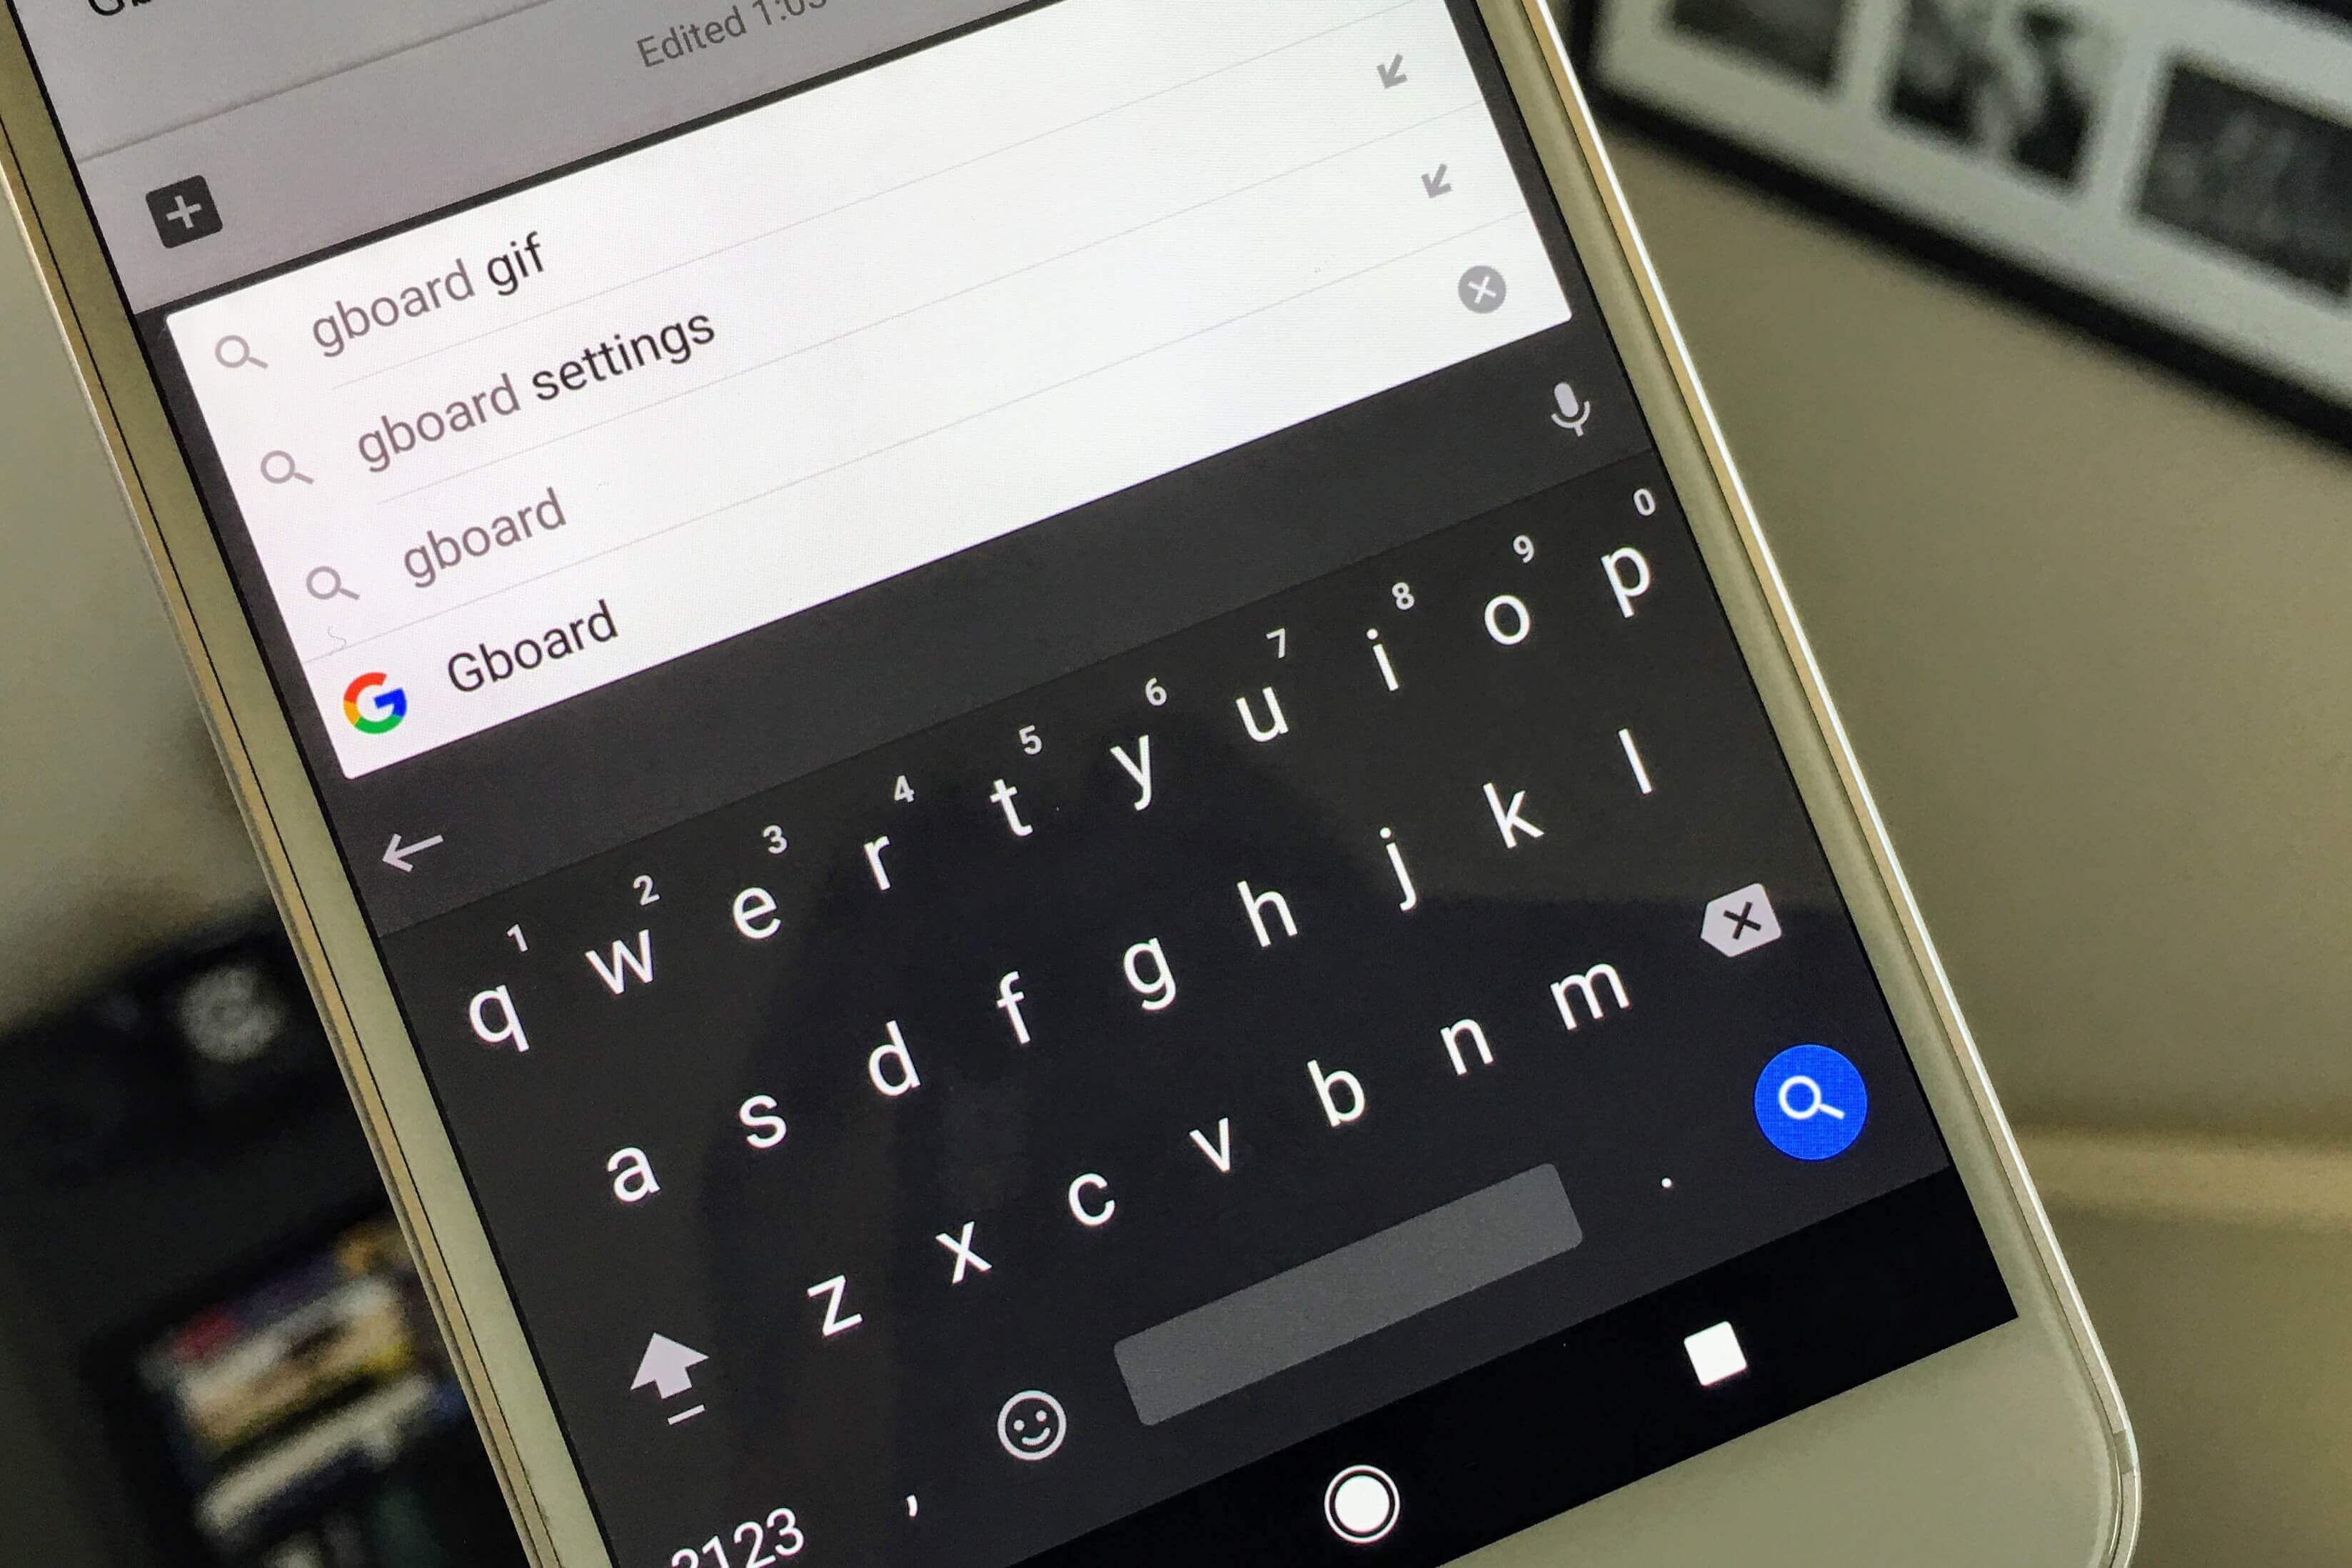 Google makes speech-to-text available completely offline in Gboard